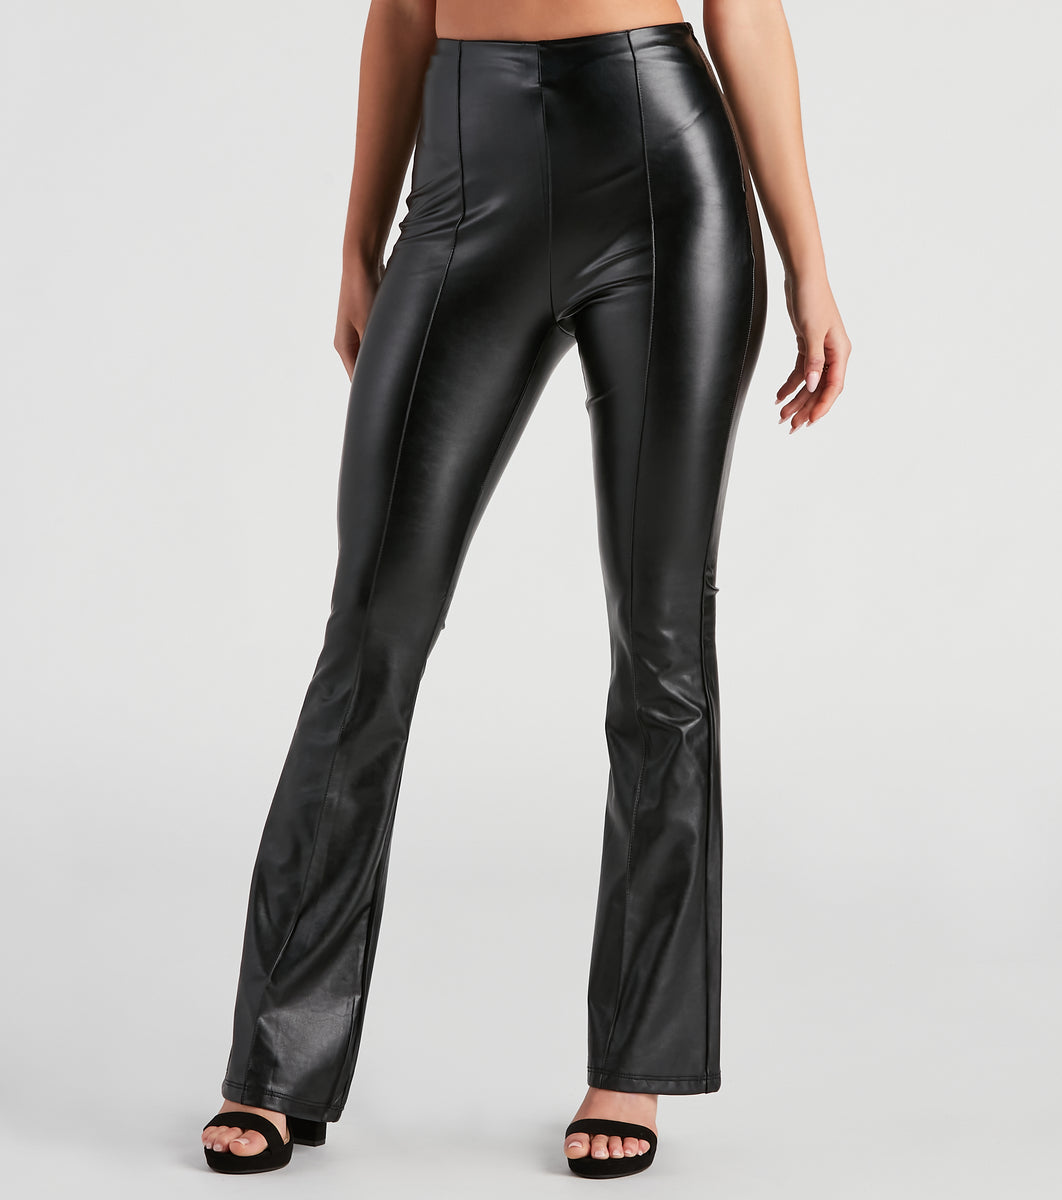 Windsor The Winner Faux Leather Flare Pants | CoolSprings Galleria